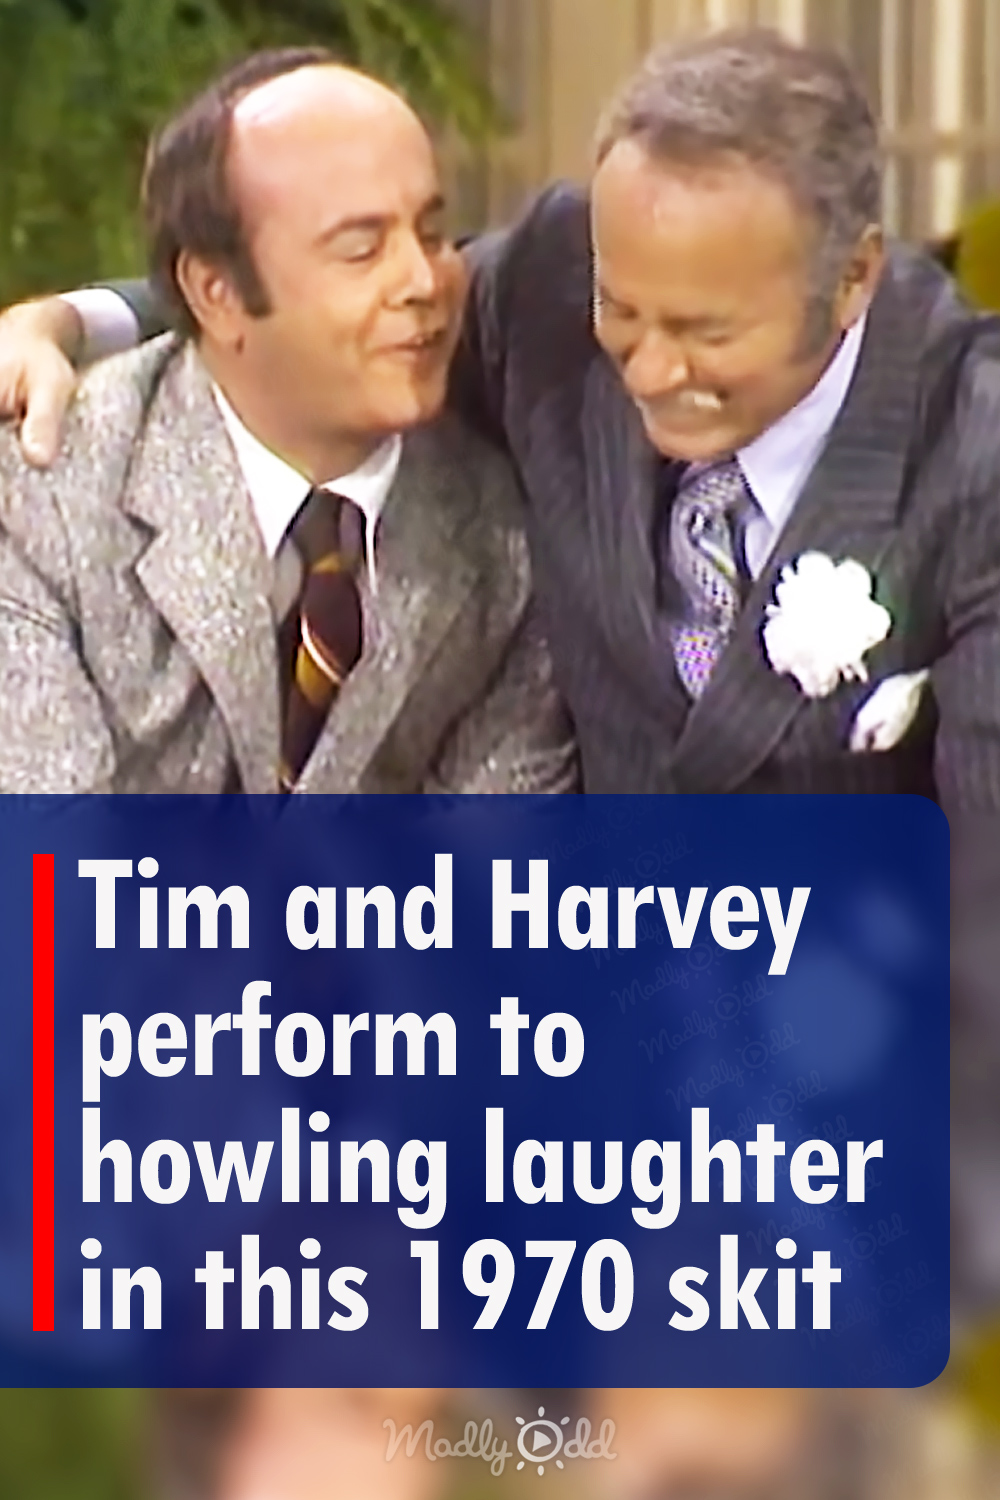 Tim and Harvey perform to howling laughter in this 1970 skit